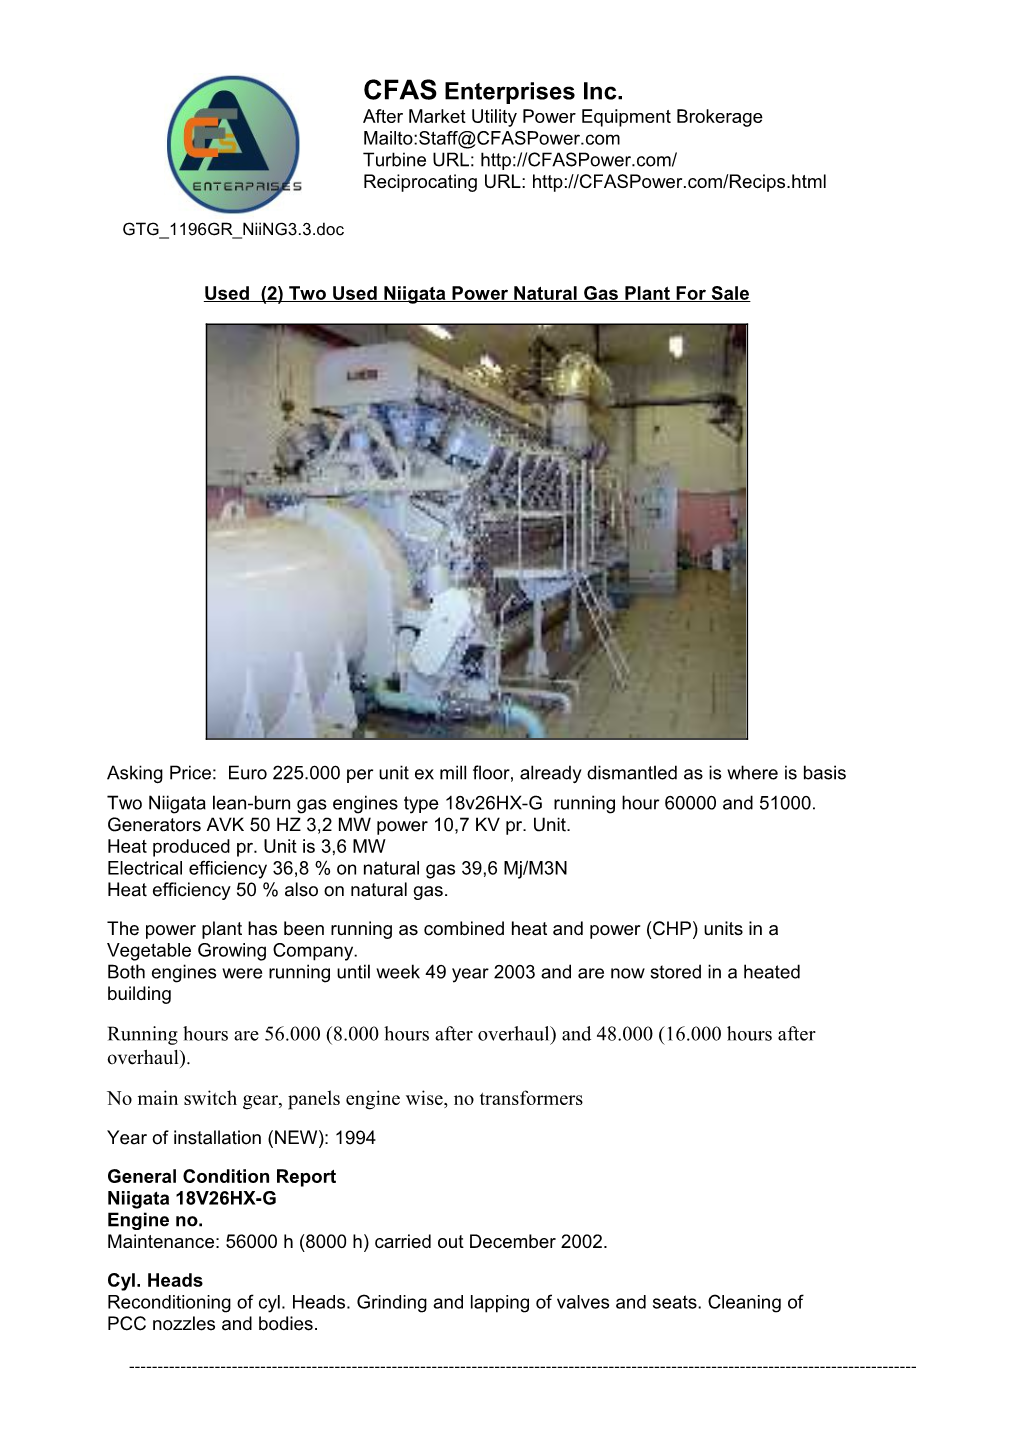 Used (2) Two Used Niigata Power Natural Gas Plant for Sale